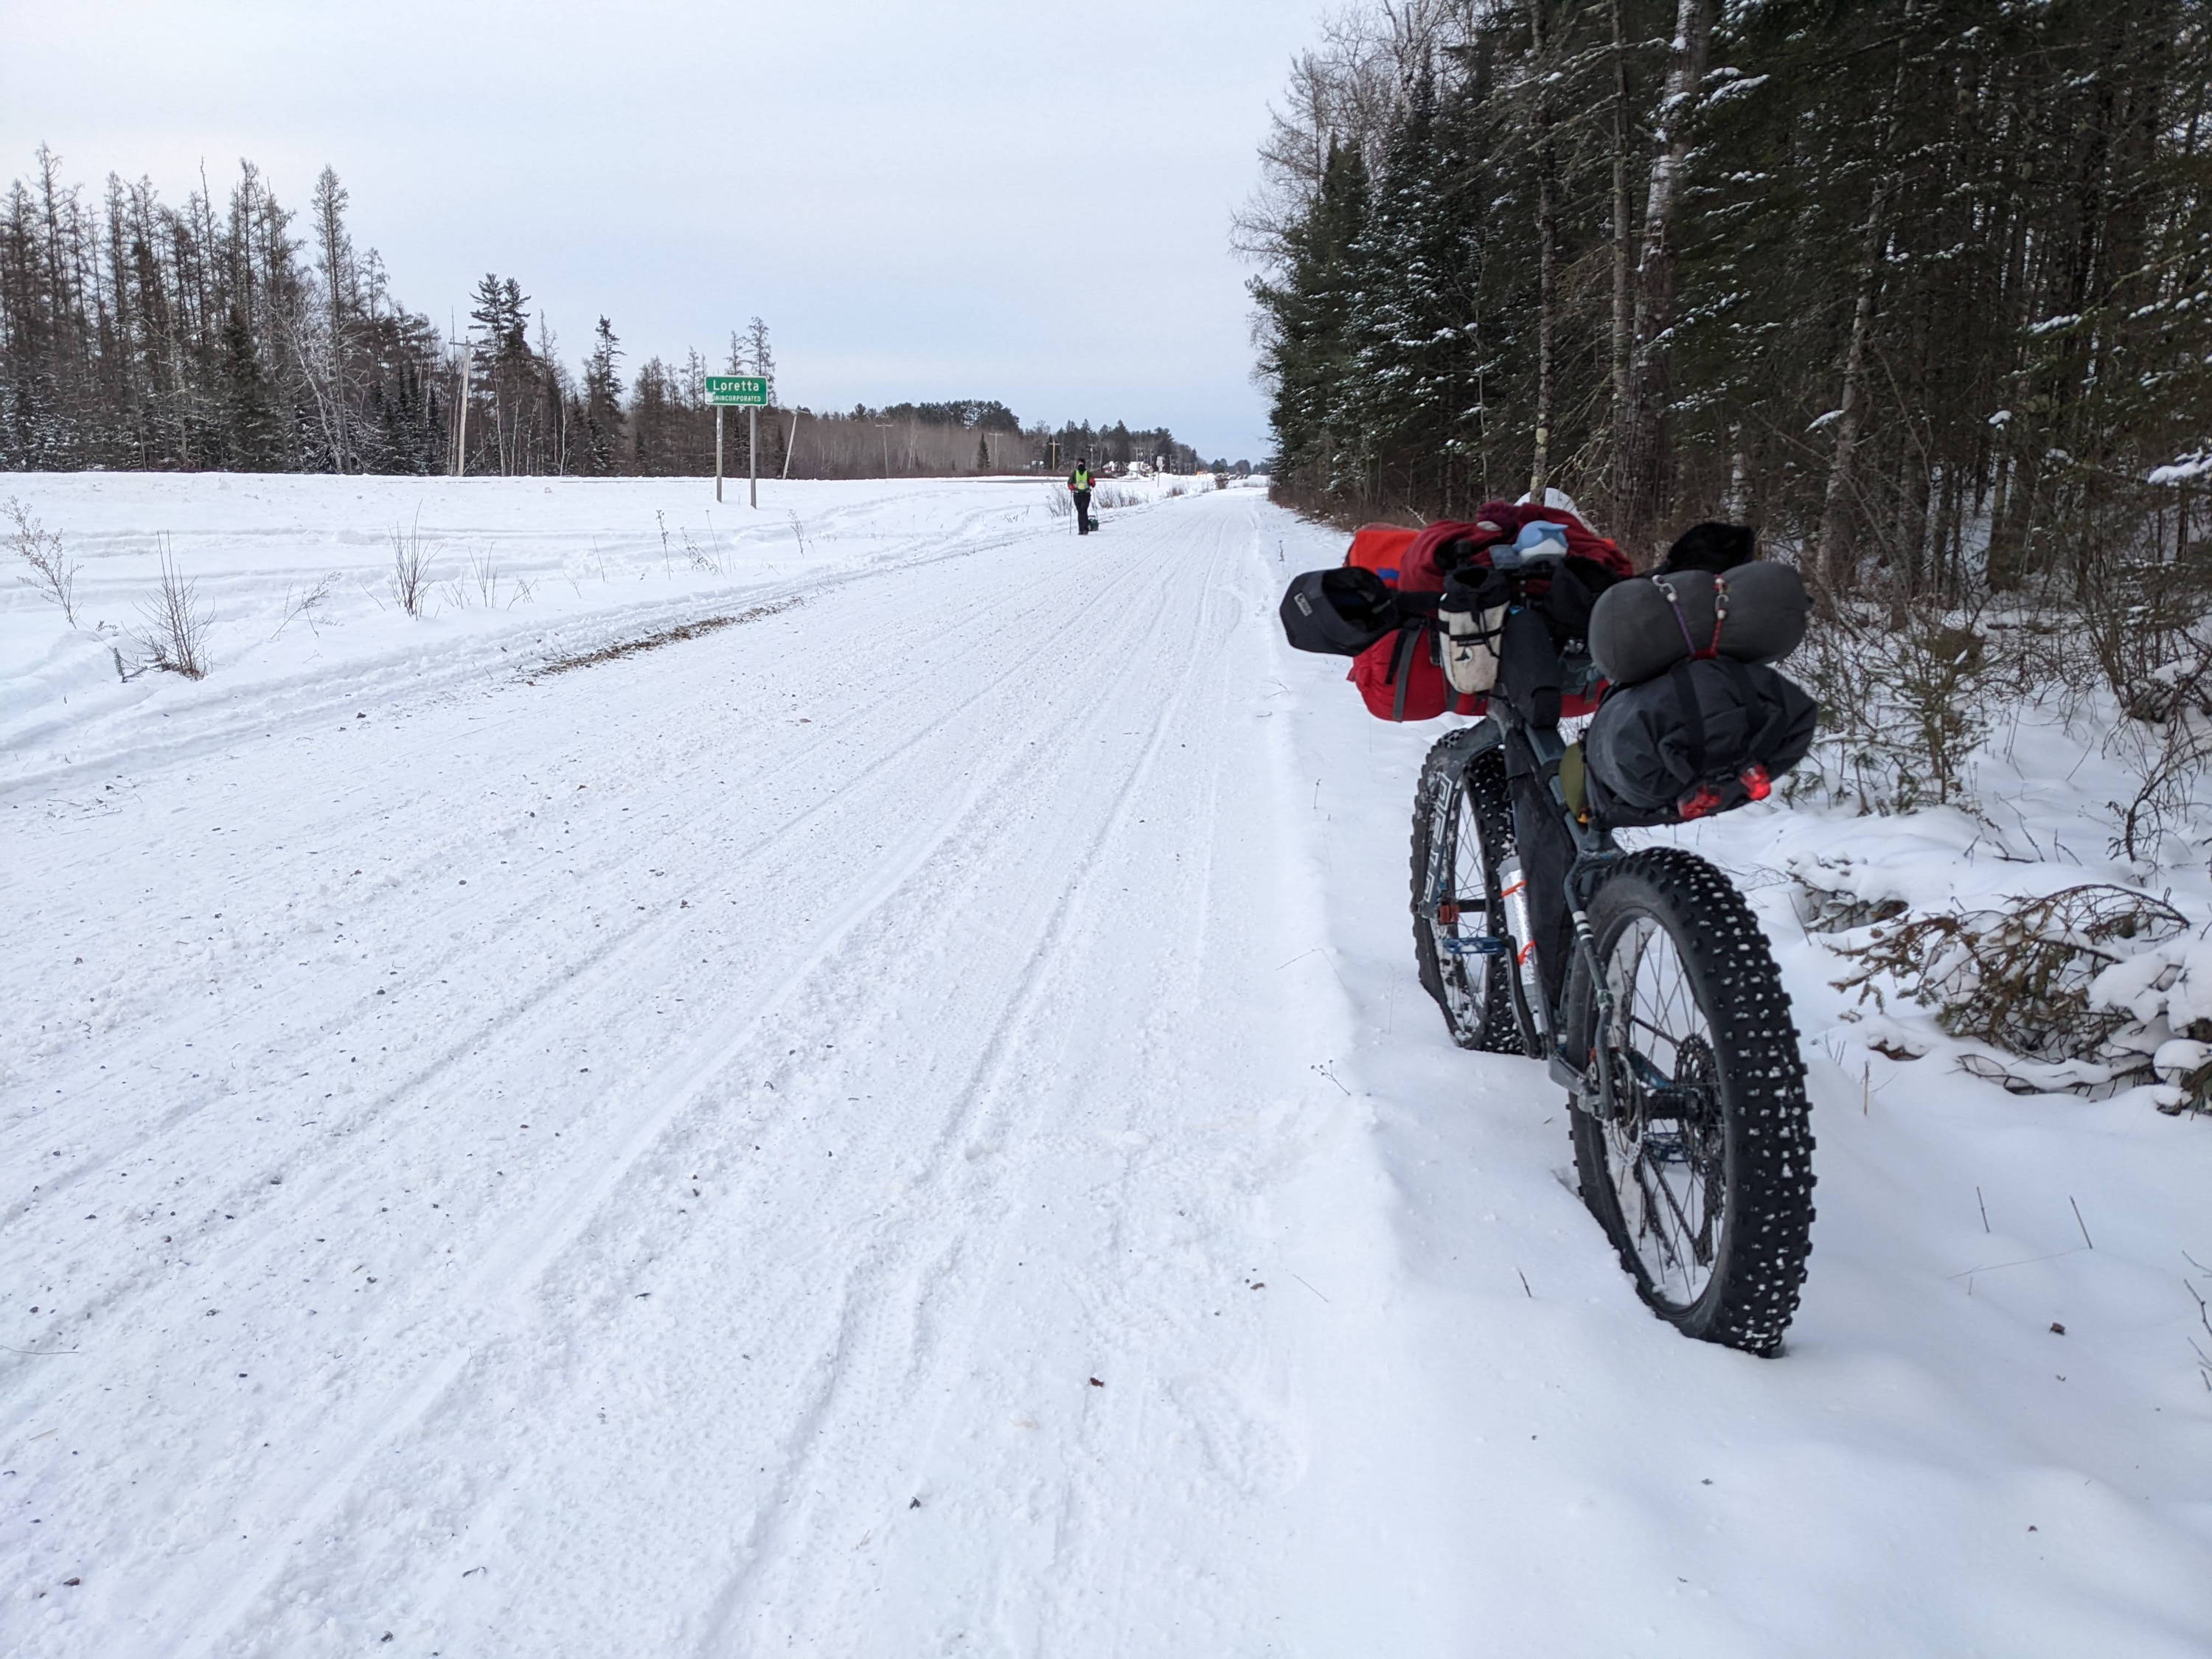 A fully-loaded bikepacking bike leans in the snow by a plowed trail road.